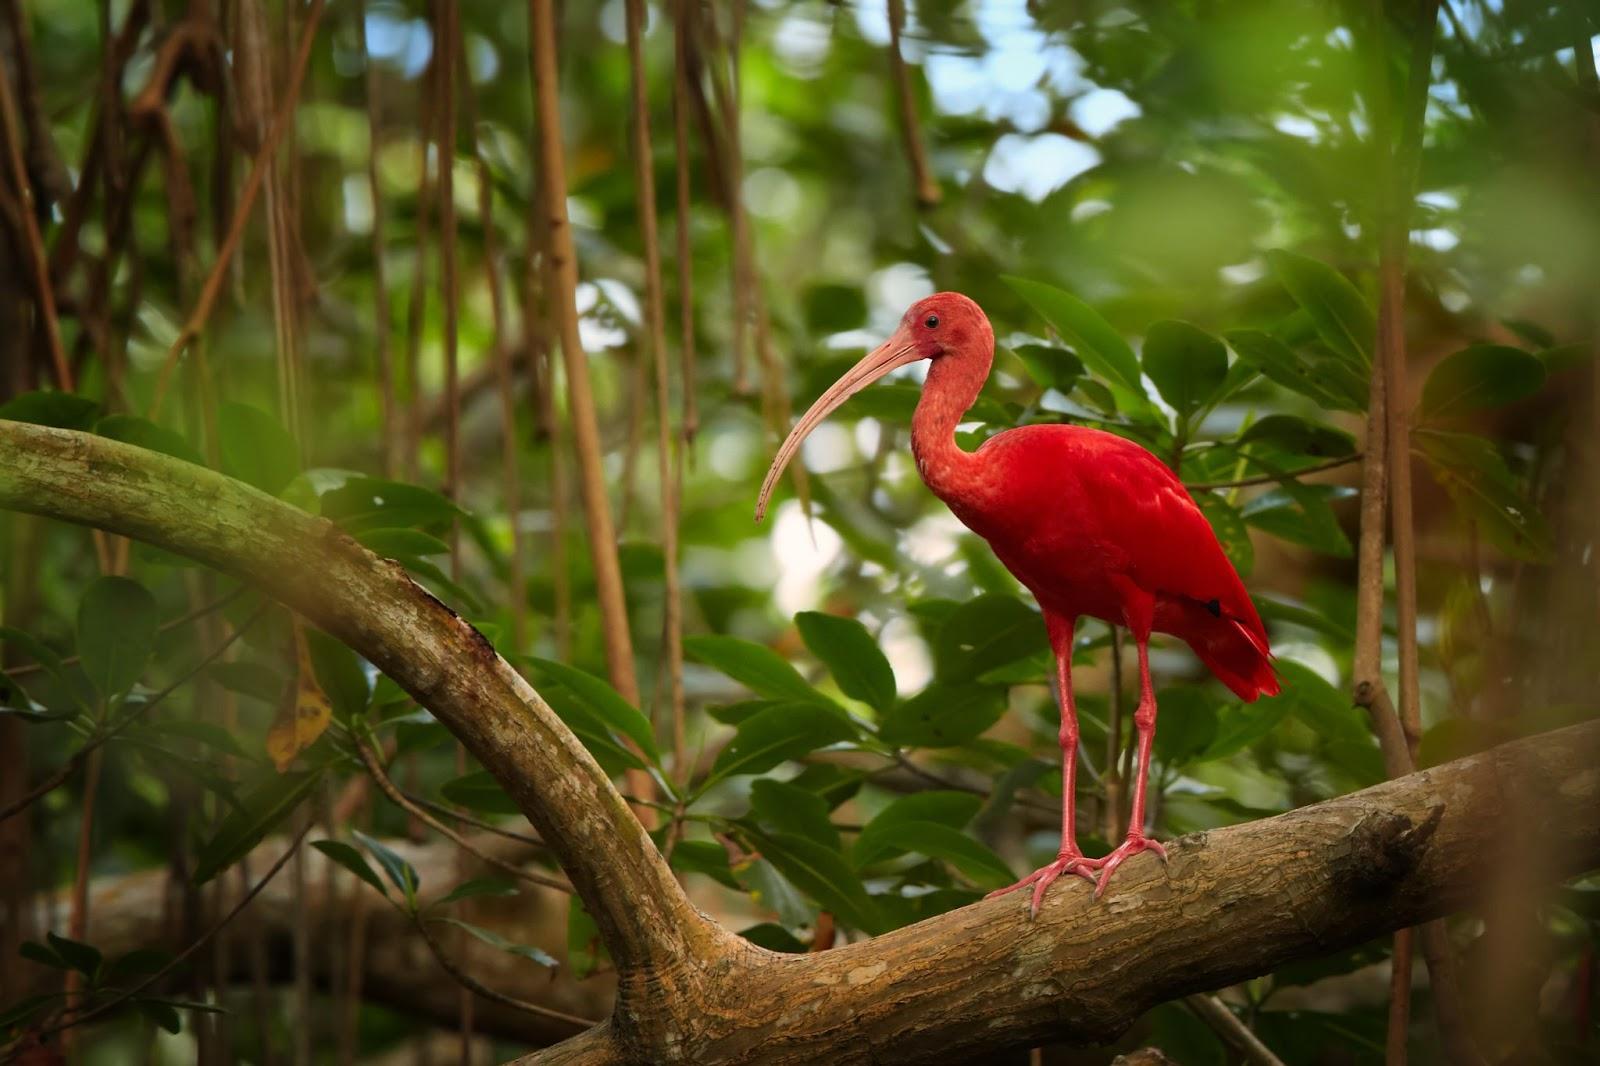 Scarlet Ibis Eudocimus ruber in its typical natural environment in mangrove forest of Trinidad